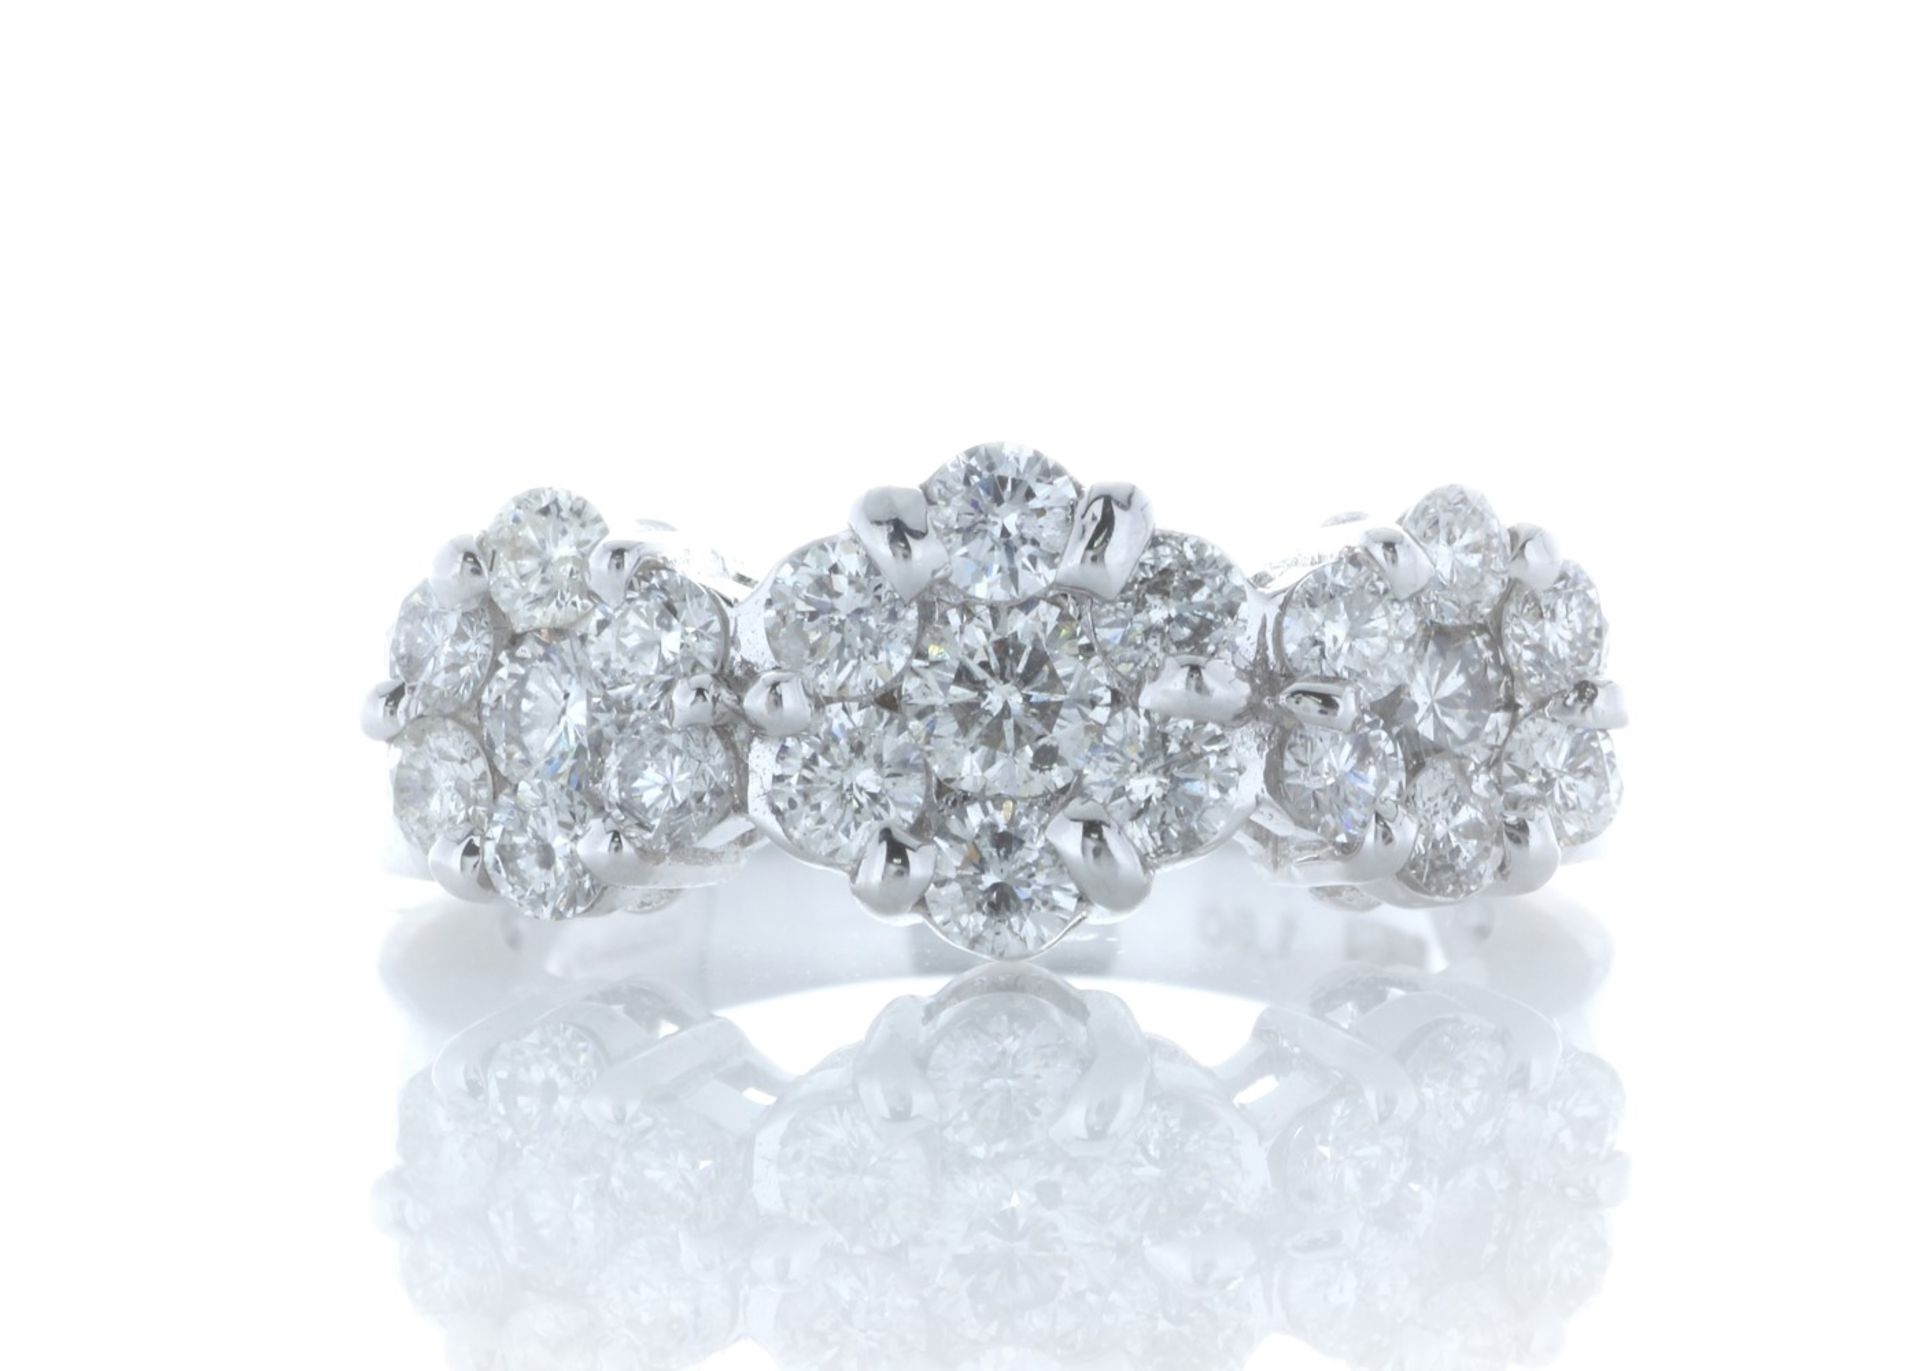 18ct White Gold Flower Cluster Diamond Ring 1.50 Carats - Valued by GIE £18,195.00 - Twenty one